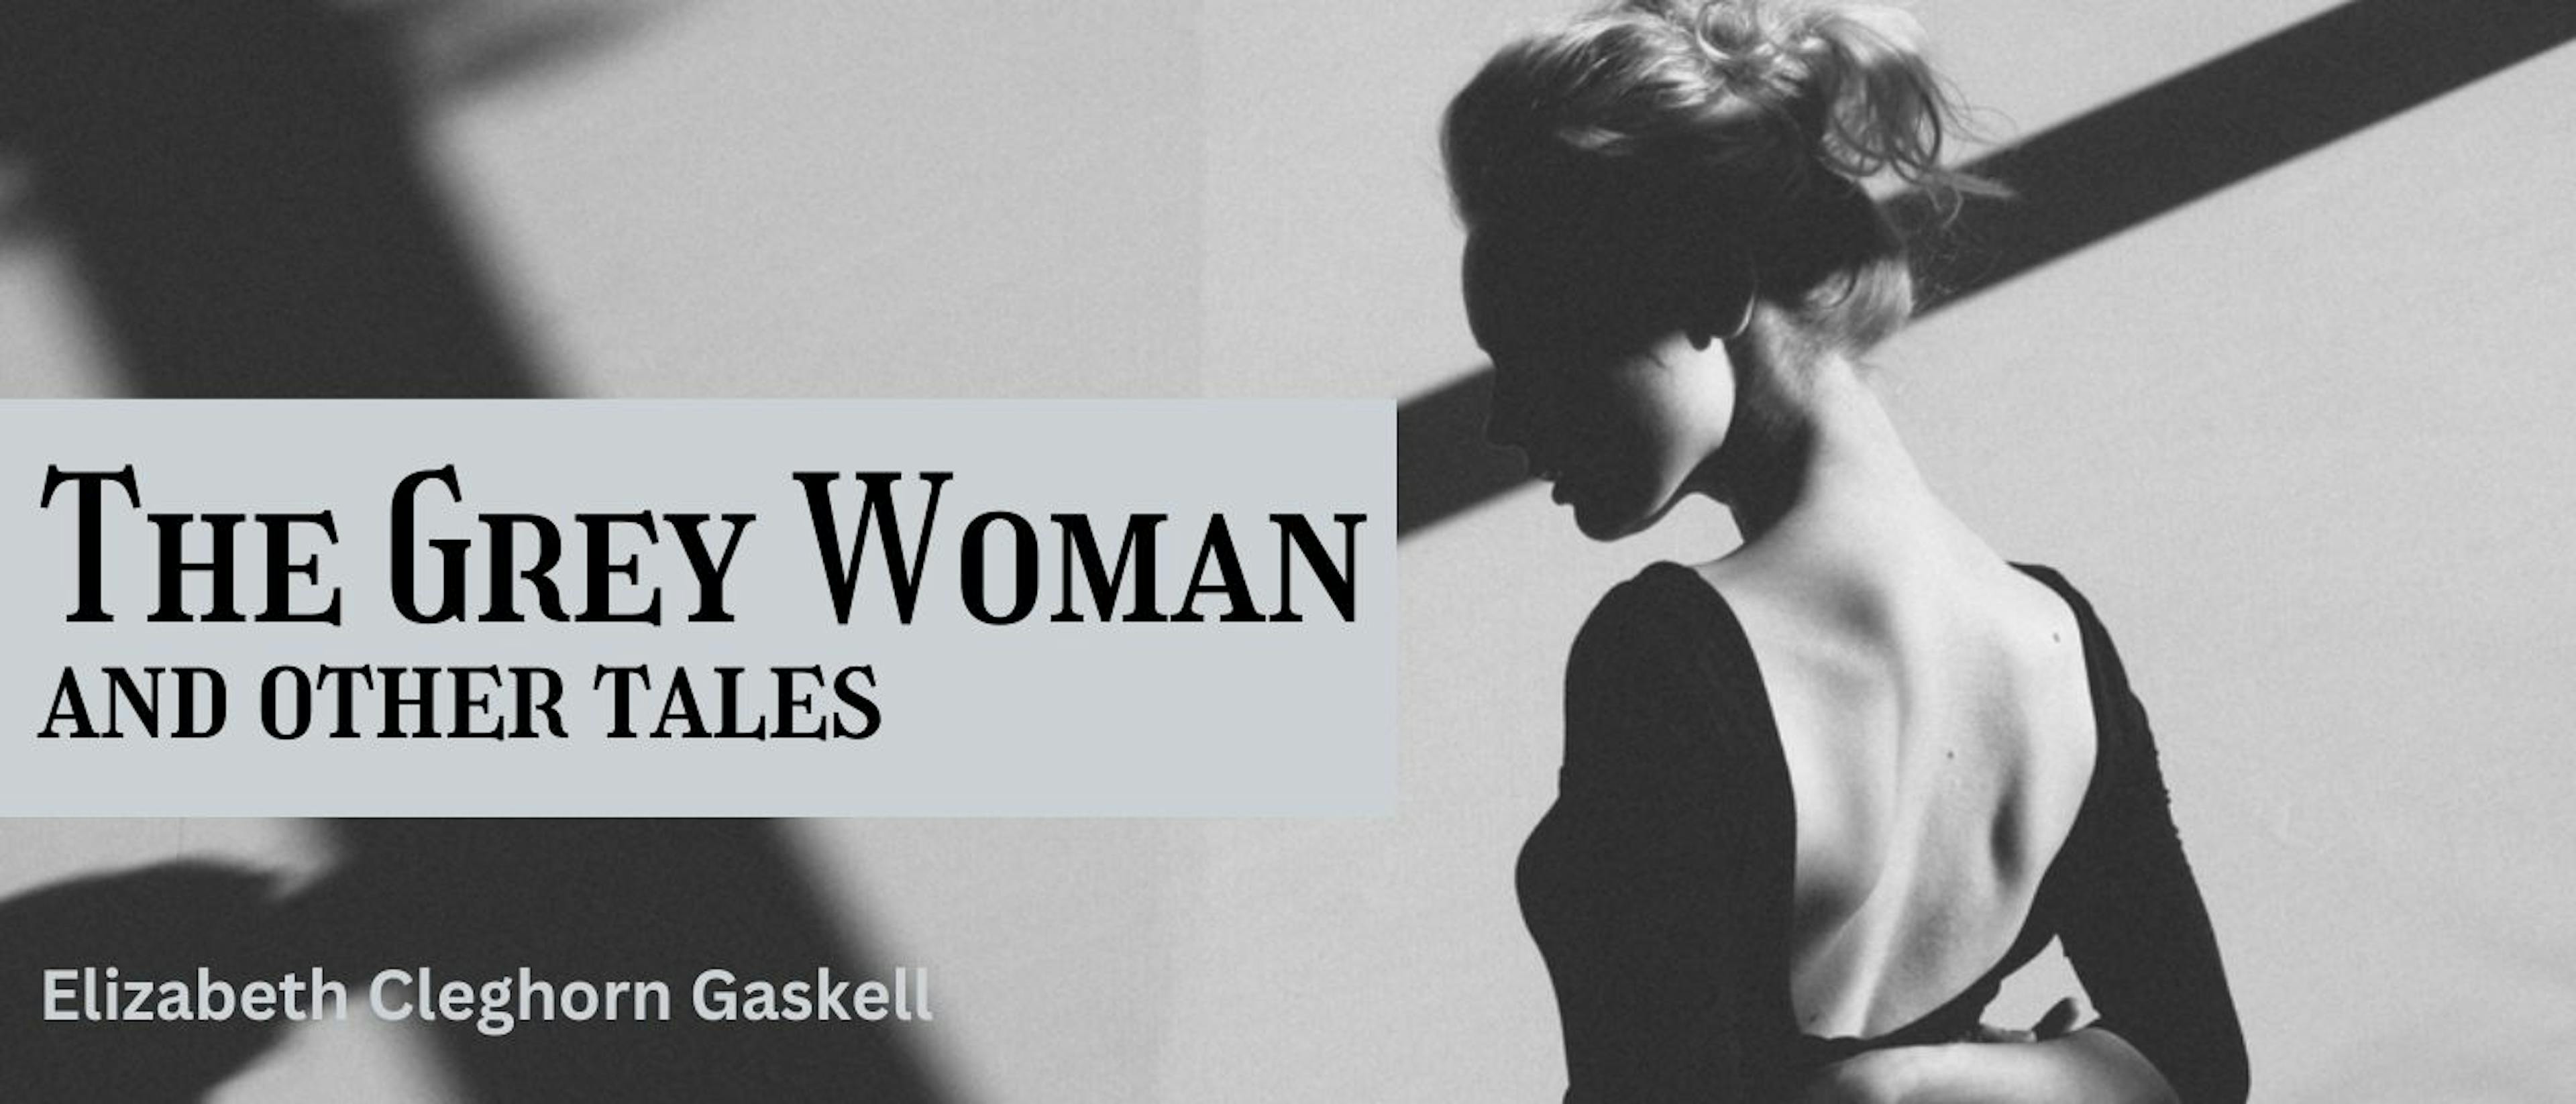 featured image - The Grey Woman and other Tales by Elizabeth Cleghorn Gaskell - Table of Links